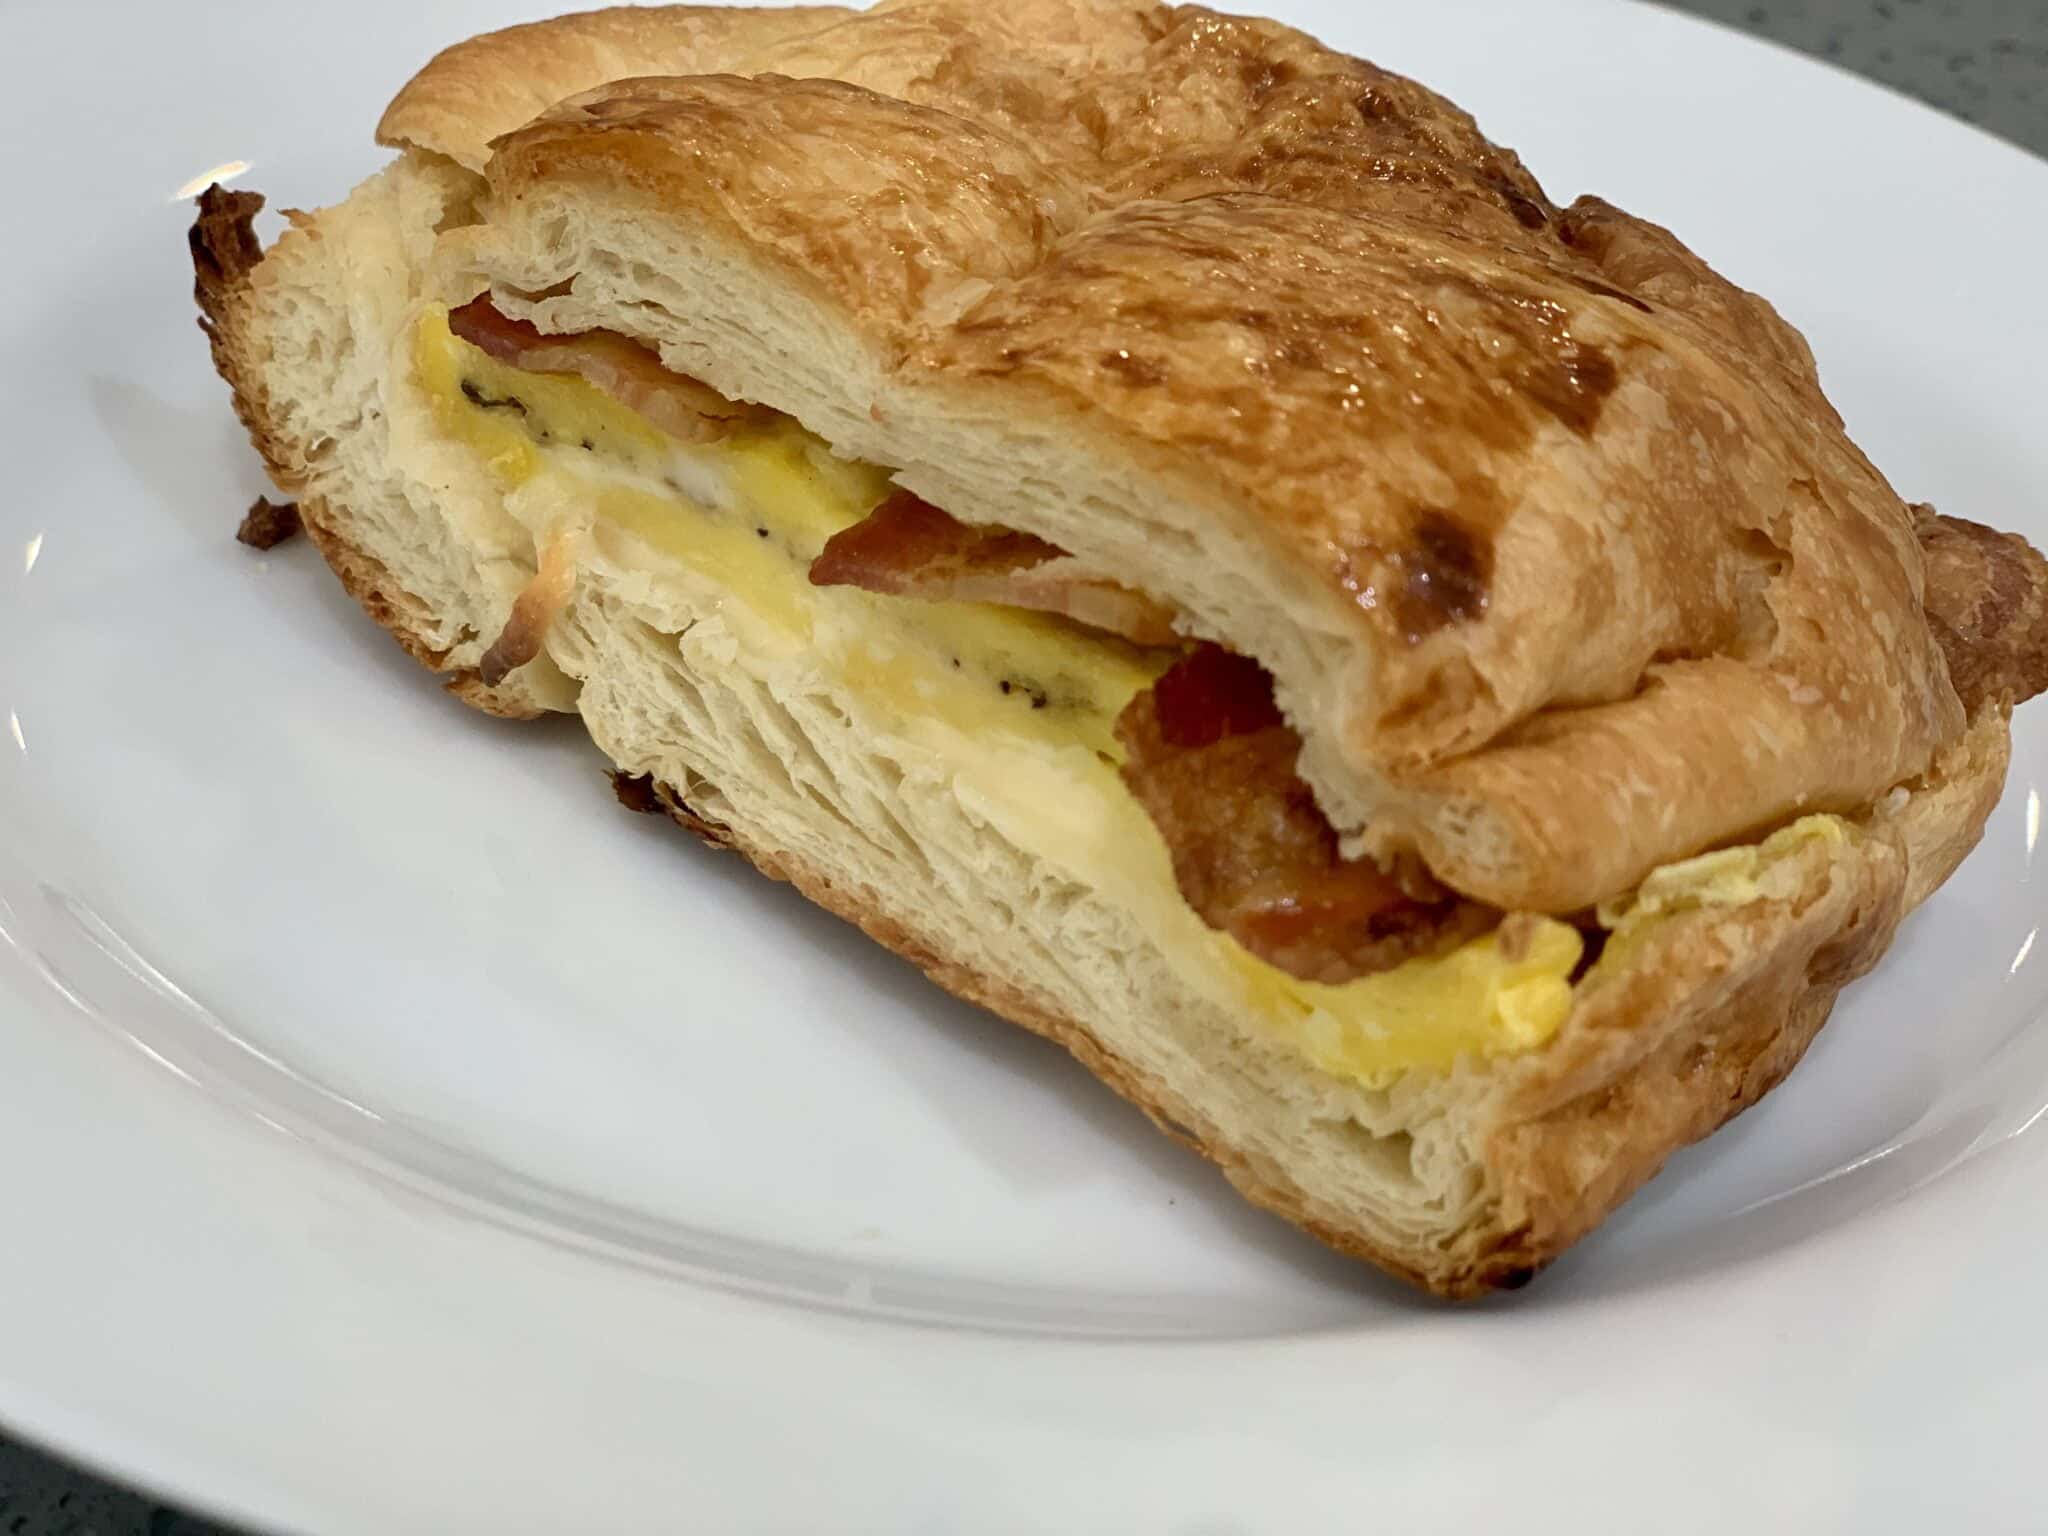 Delicious Bacon, Egg, and Cheese Croissant